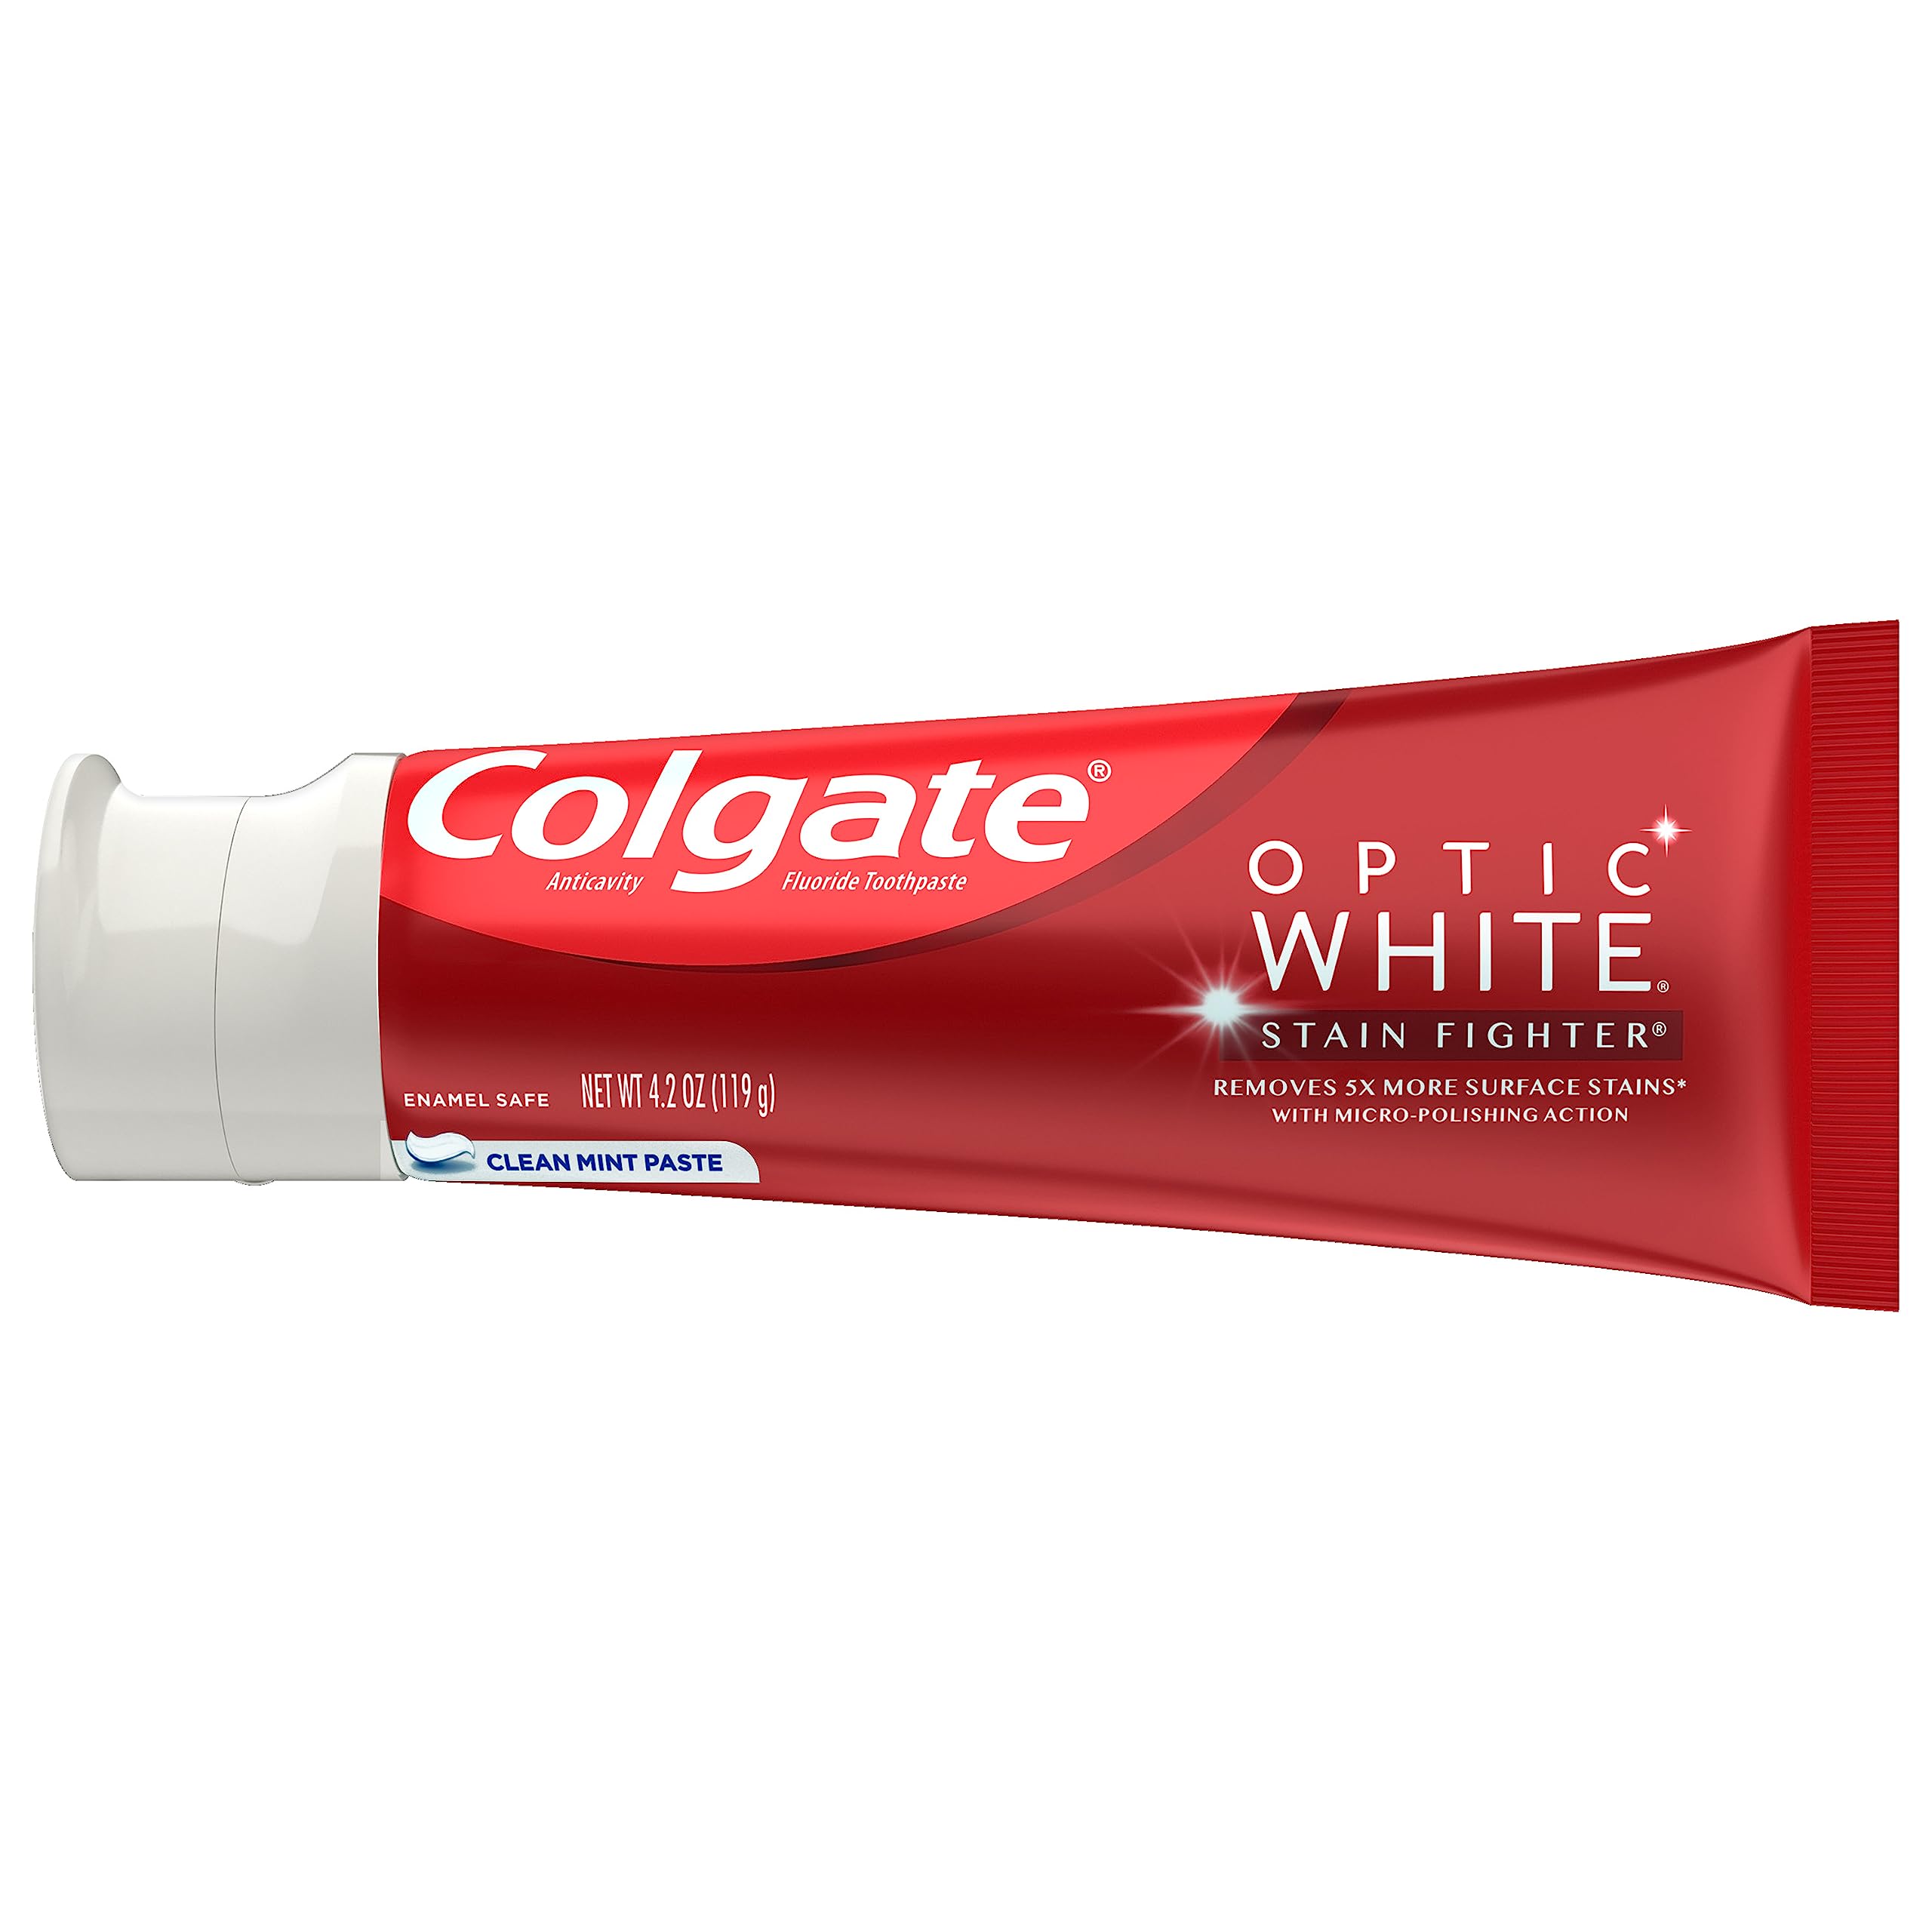 Colgate Optic White Stain Fighter Whitening Toothpaste, Clean Mint Flavor, Safely Removes Surface Stains, Enamel-Safe for Daily Use, Teeth Whitening Toothpaste with Fluoride, 4.2 Oz Tube